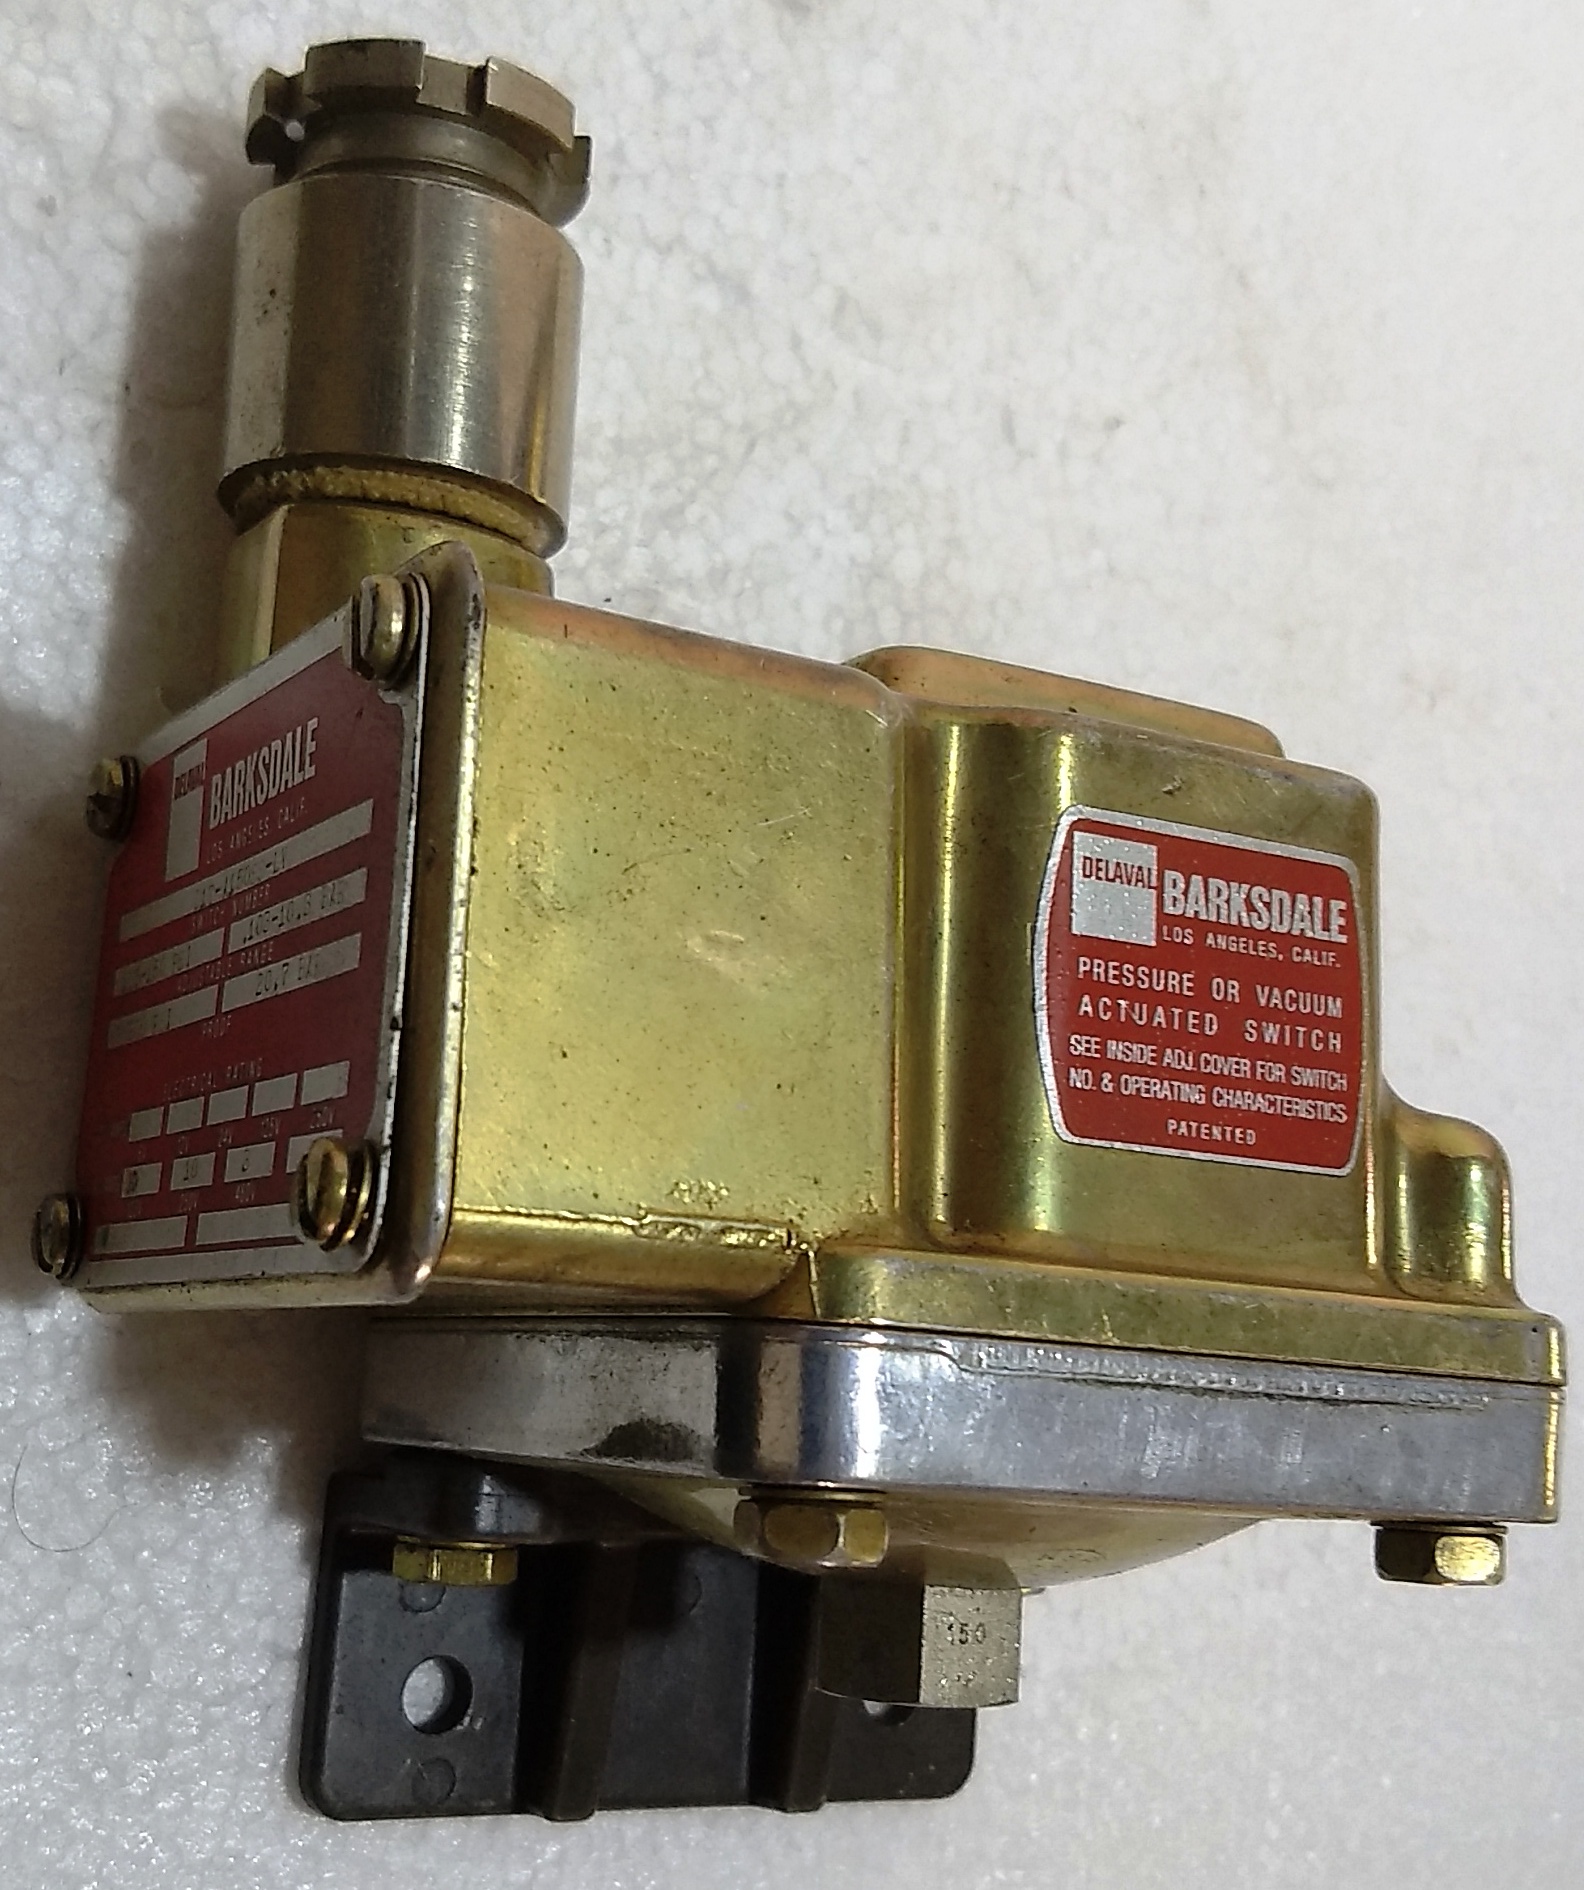 Barksdale Pressure or Vaccum Actuated Switch D1T-A150SS-LV 1.5 to 150 PSI Range